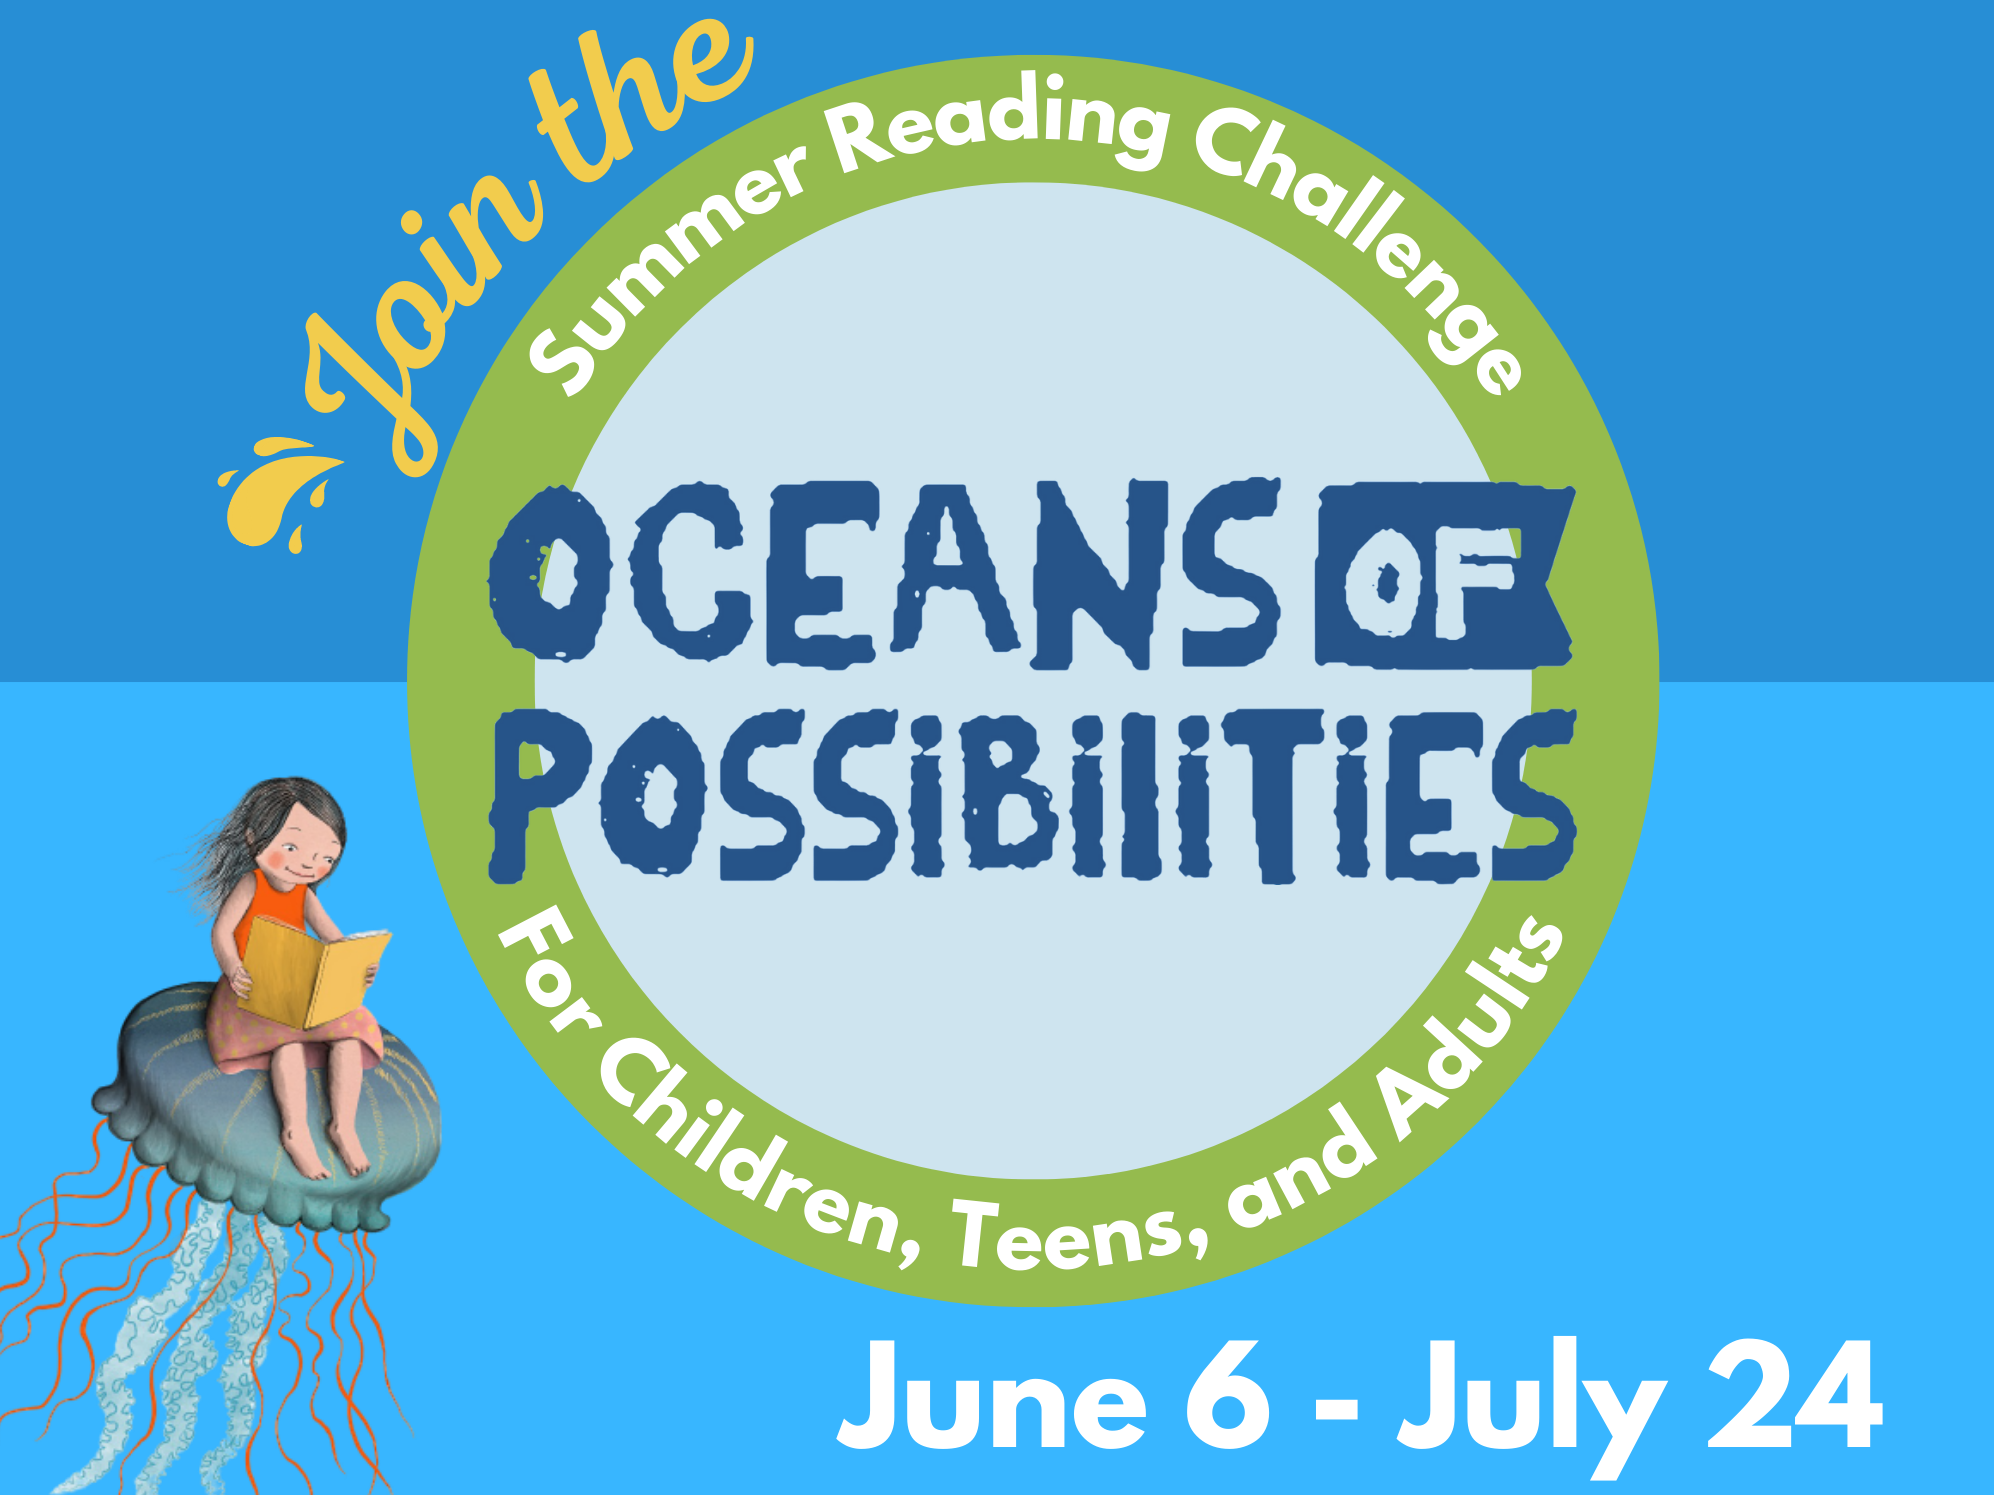 Join the Summer Reading Challenge Oceans of Possibilities for Children, Teens, and Adults June 6 - July 24